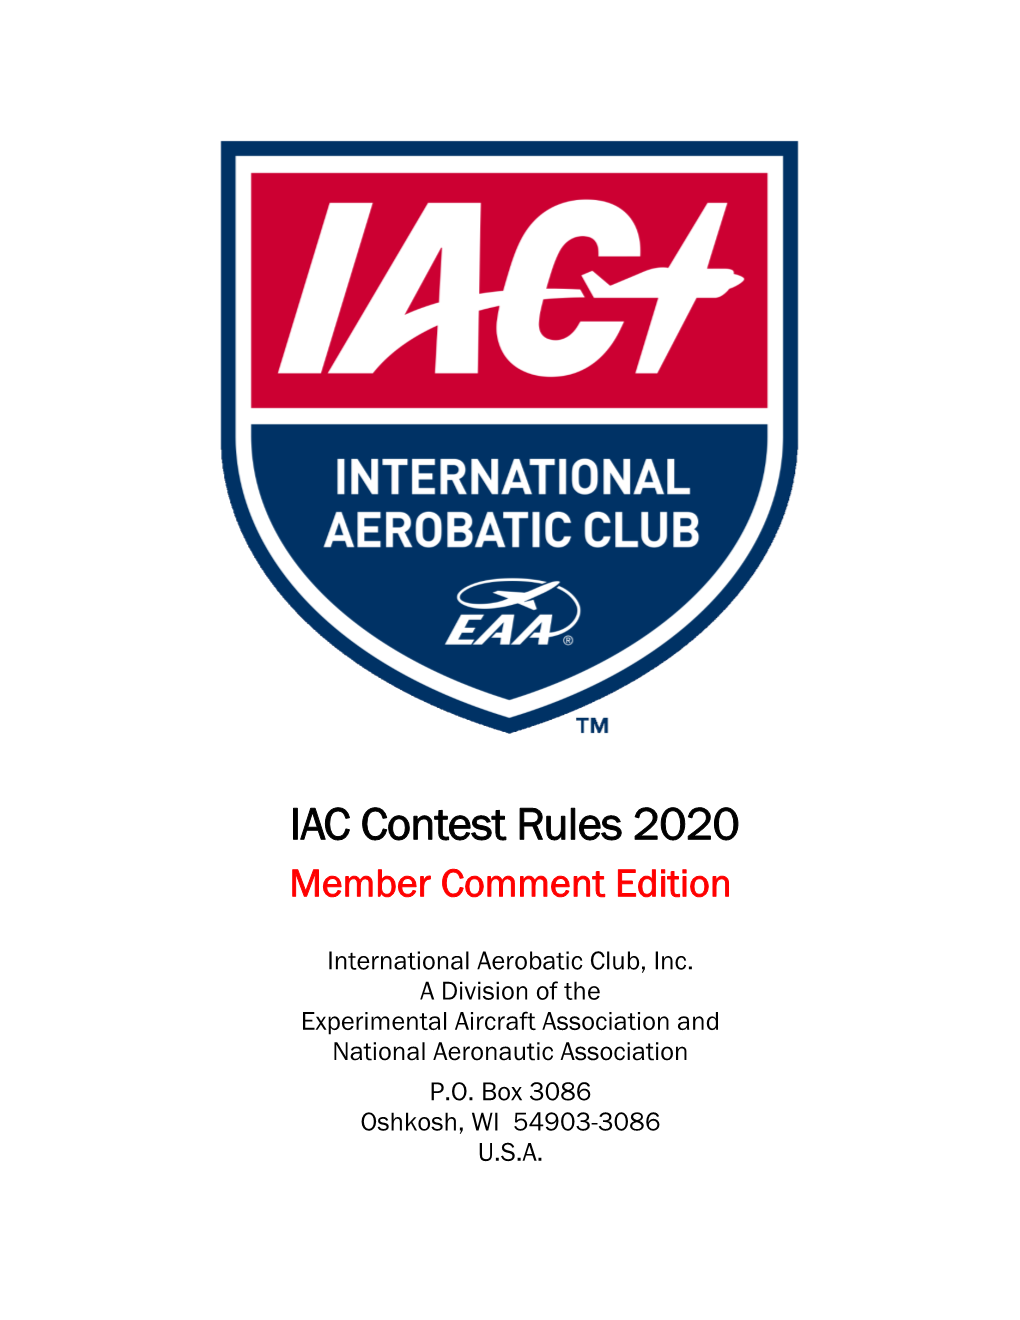 IAC Contest Rules 2020 Member Comment Edition